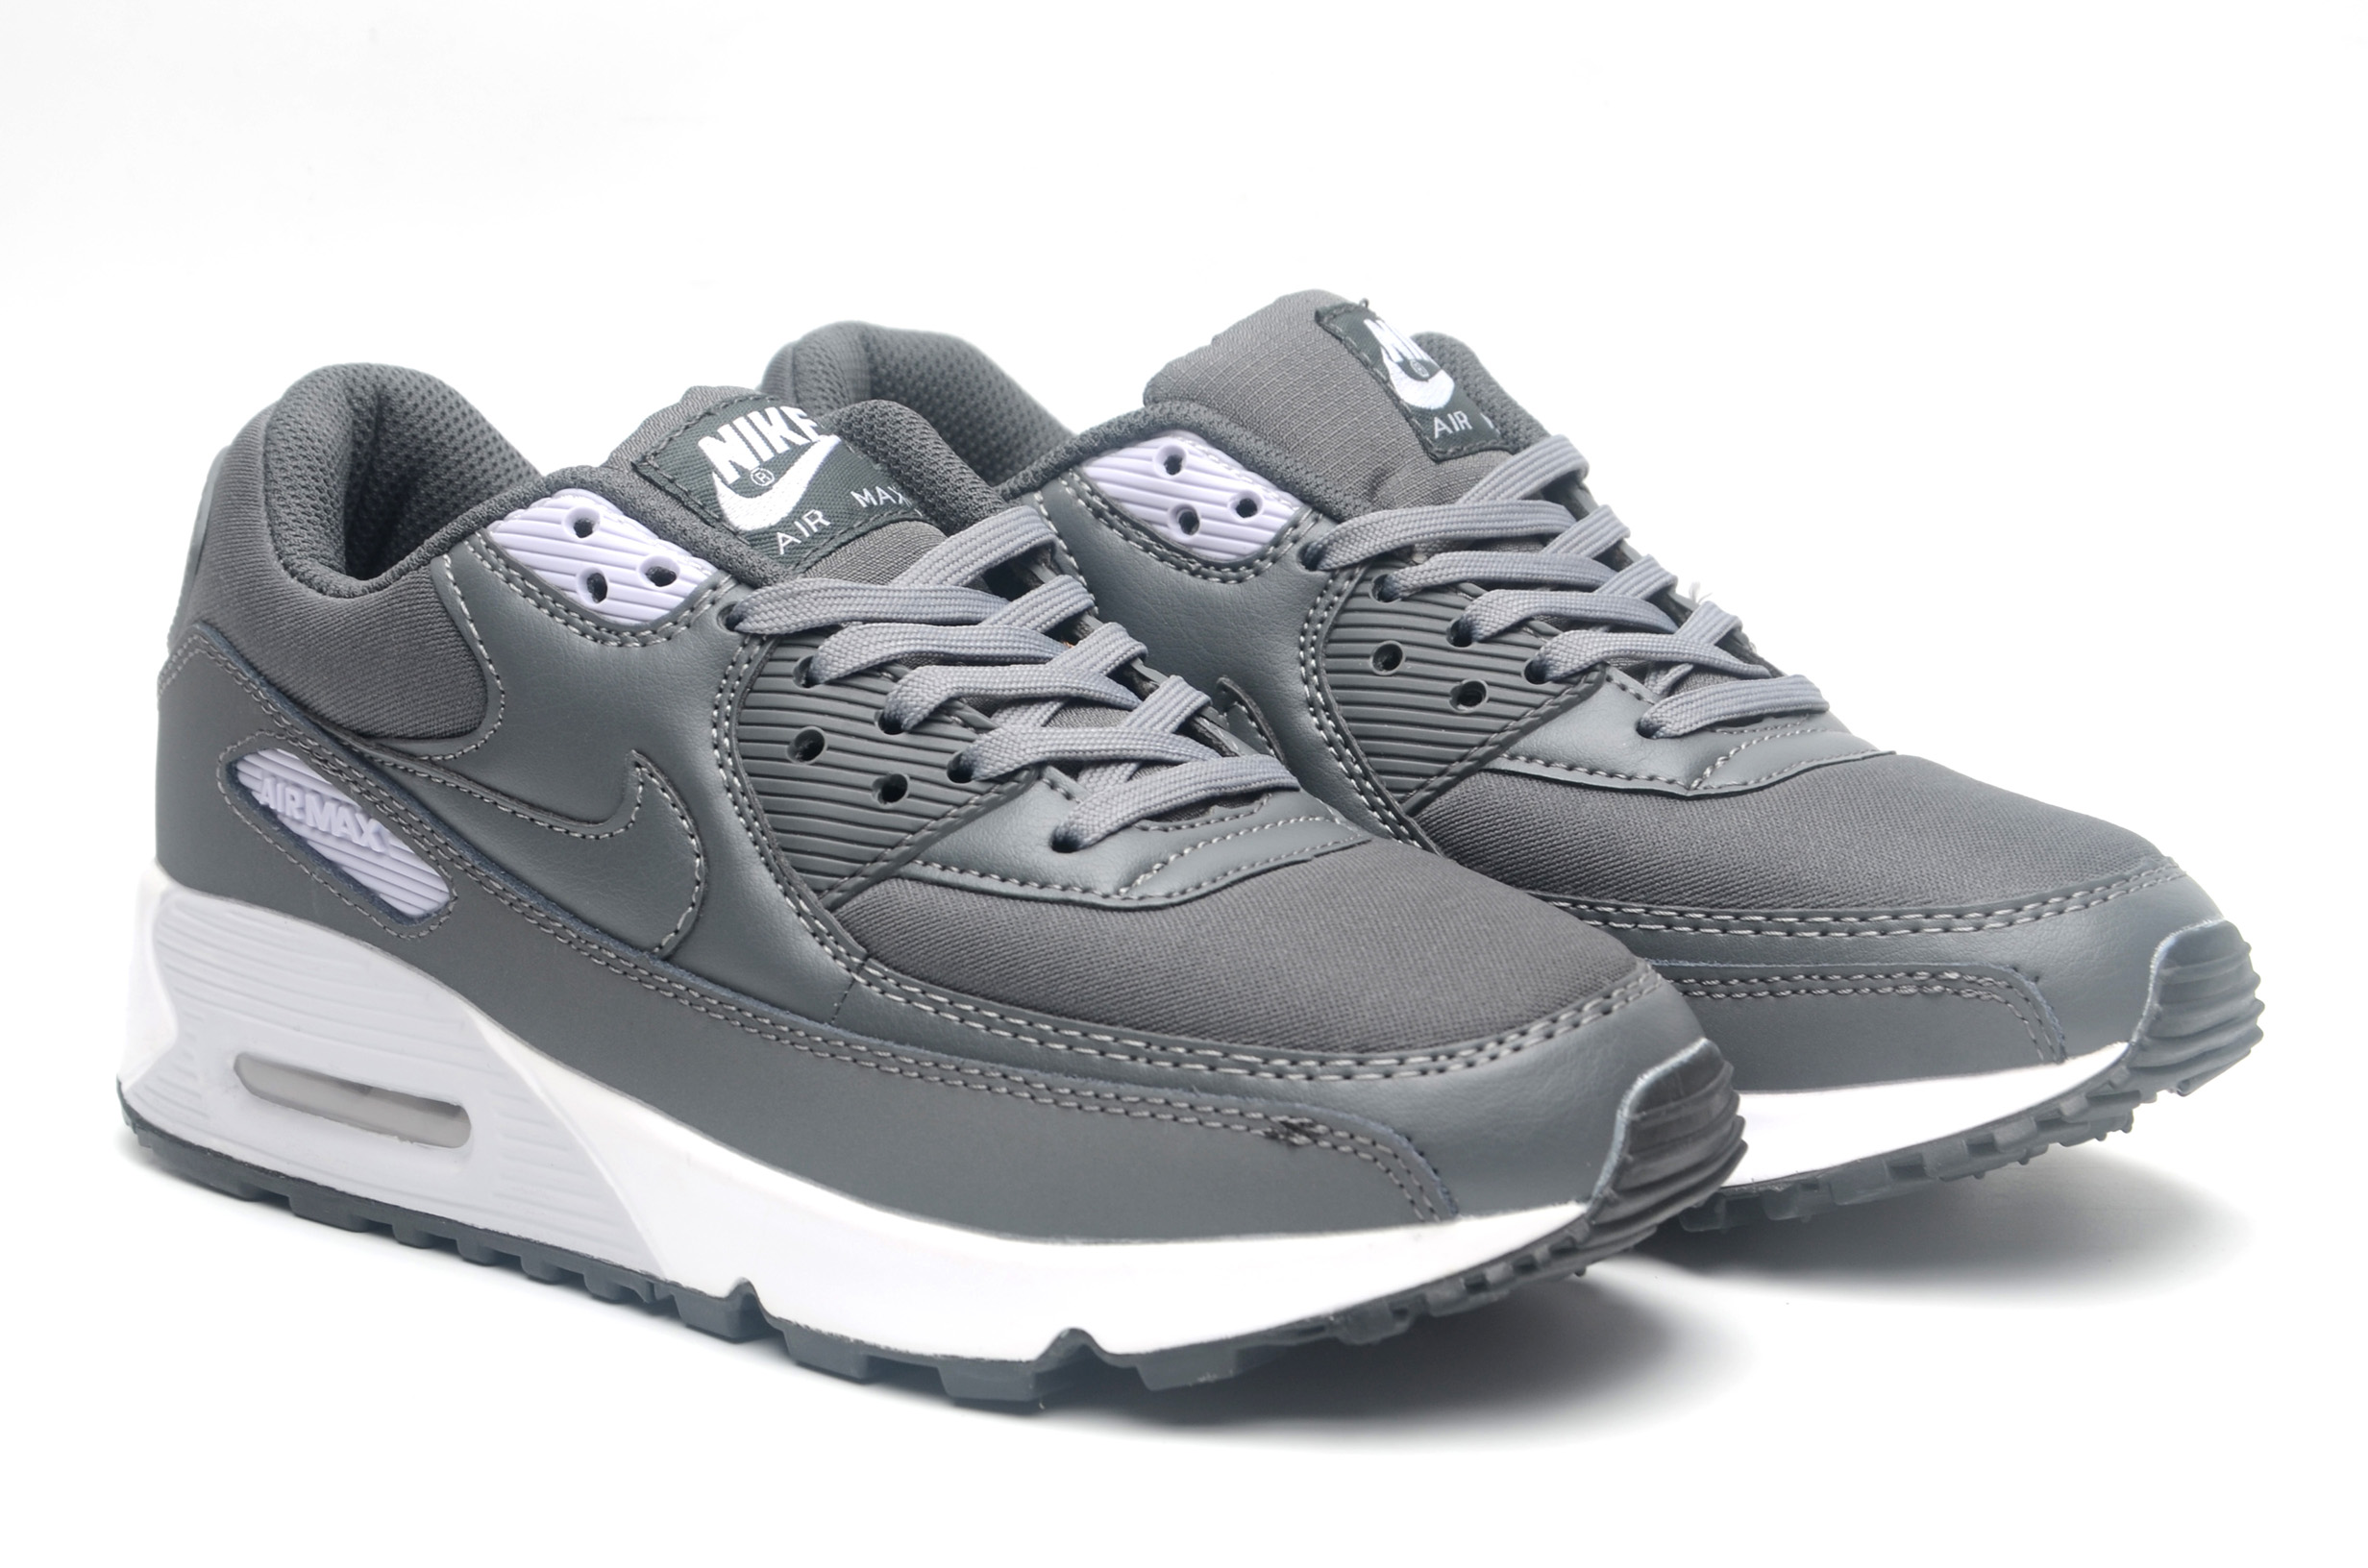 Women's Running weapon Air Max 90 Shoes 027